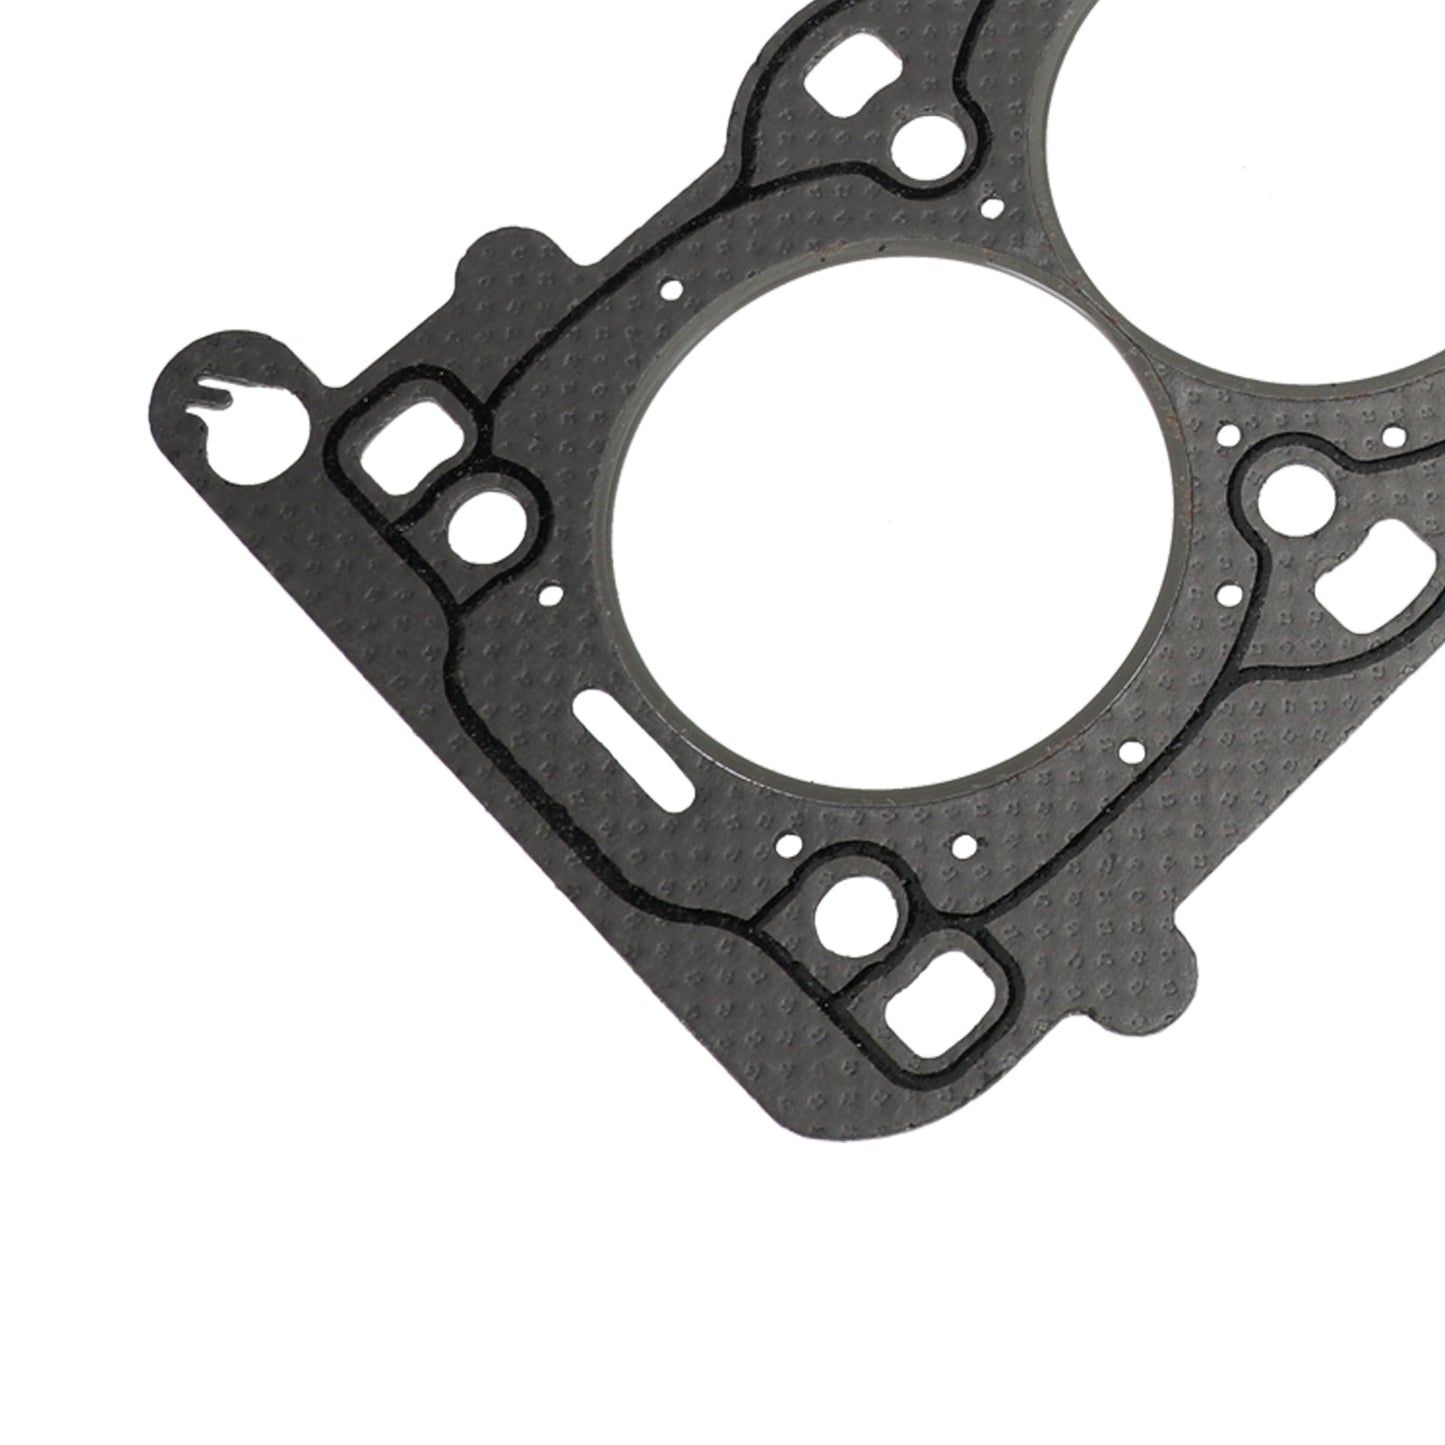 Cylinder Head Gasket 55562233 for Chevrolet Cruze Sonic Buick 1.4L 2011-2016